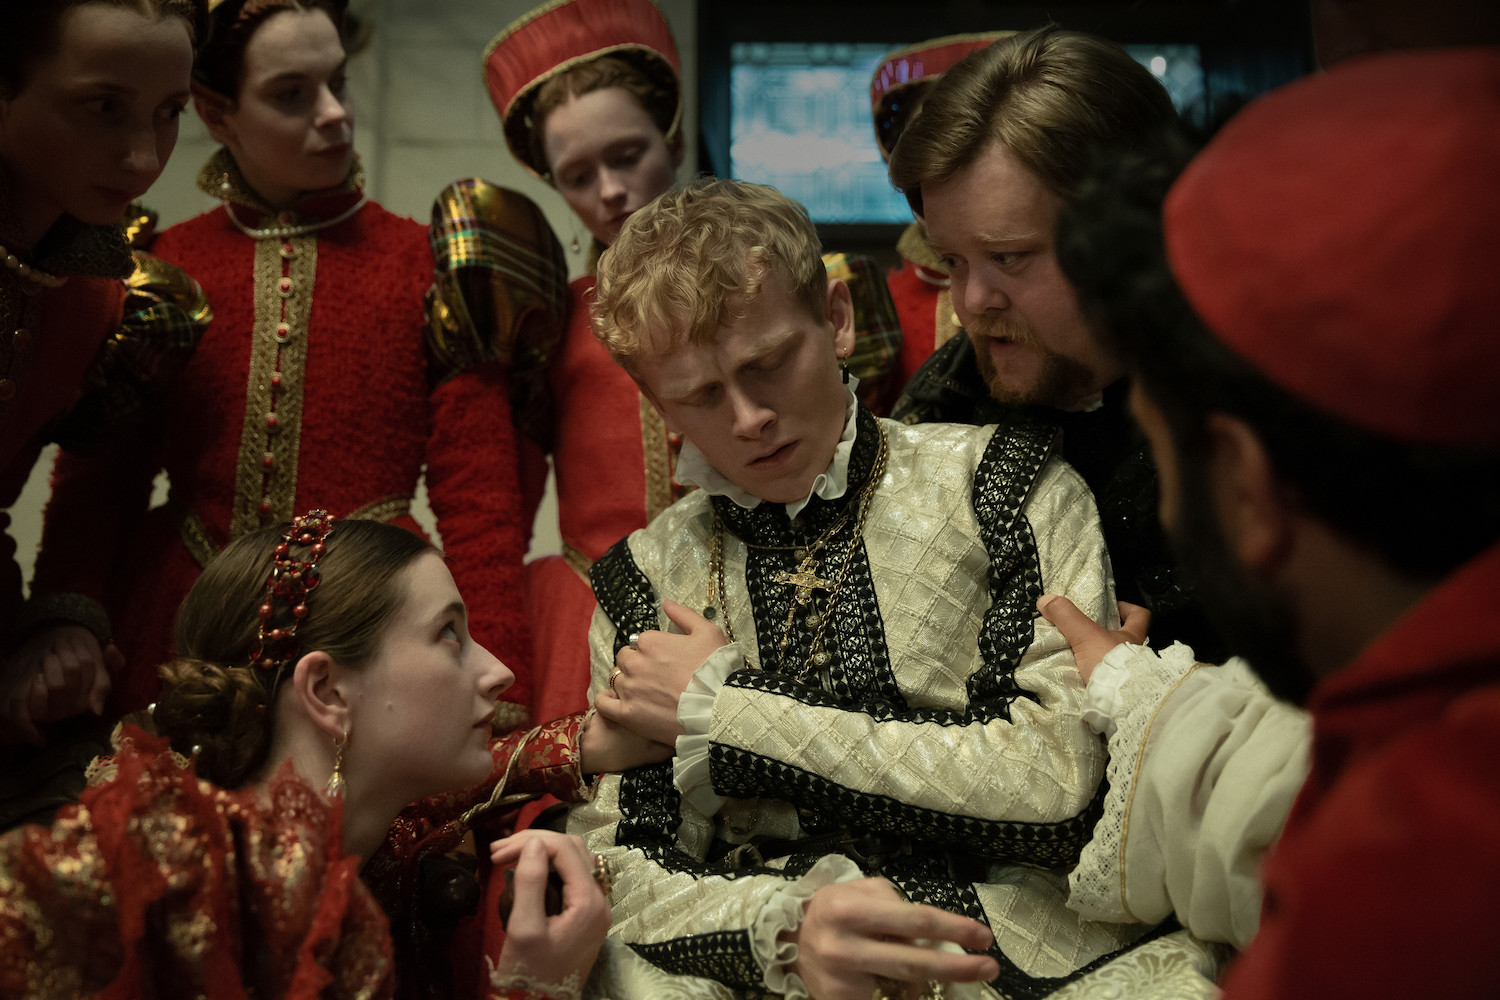 Picture shows: the new king Francis (George Jaques) is comforted by Mary (Antonia Clarke) and Louis de Bourbon (Danny Kirrane) while Mary's attendants look on.